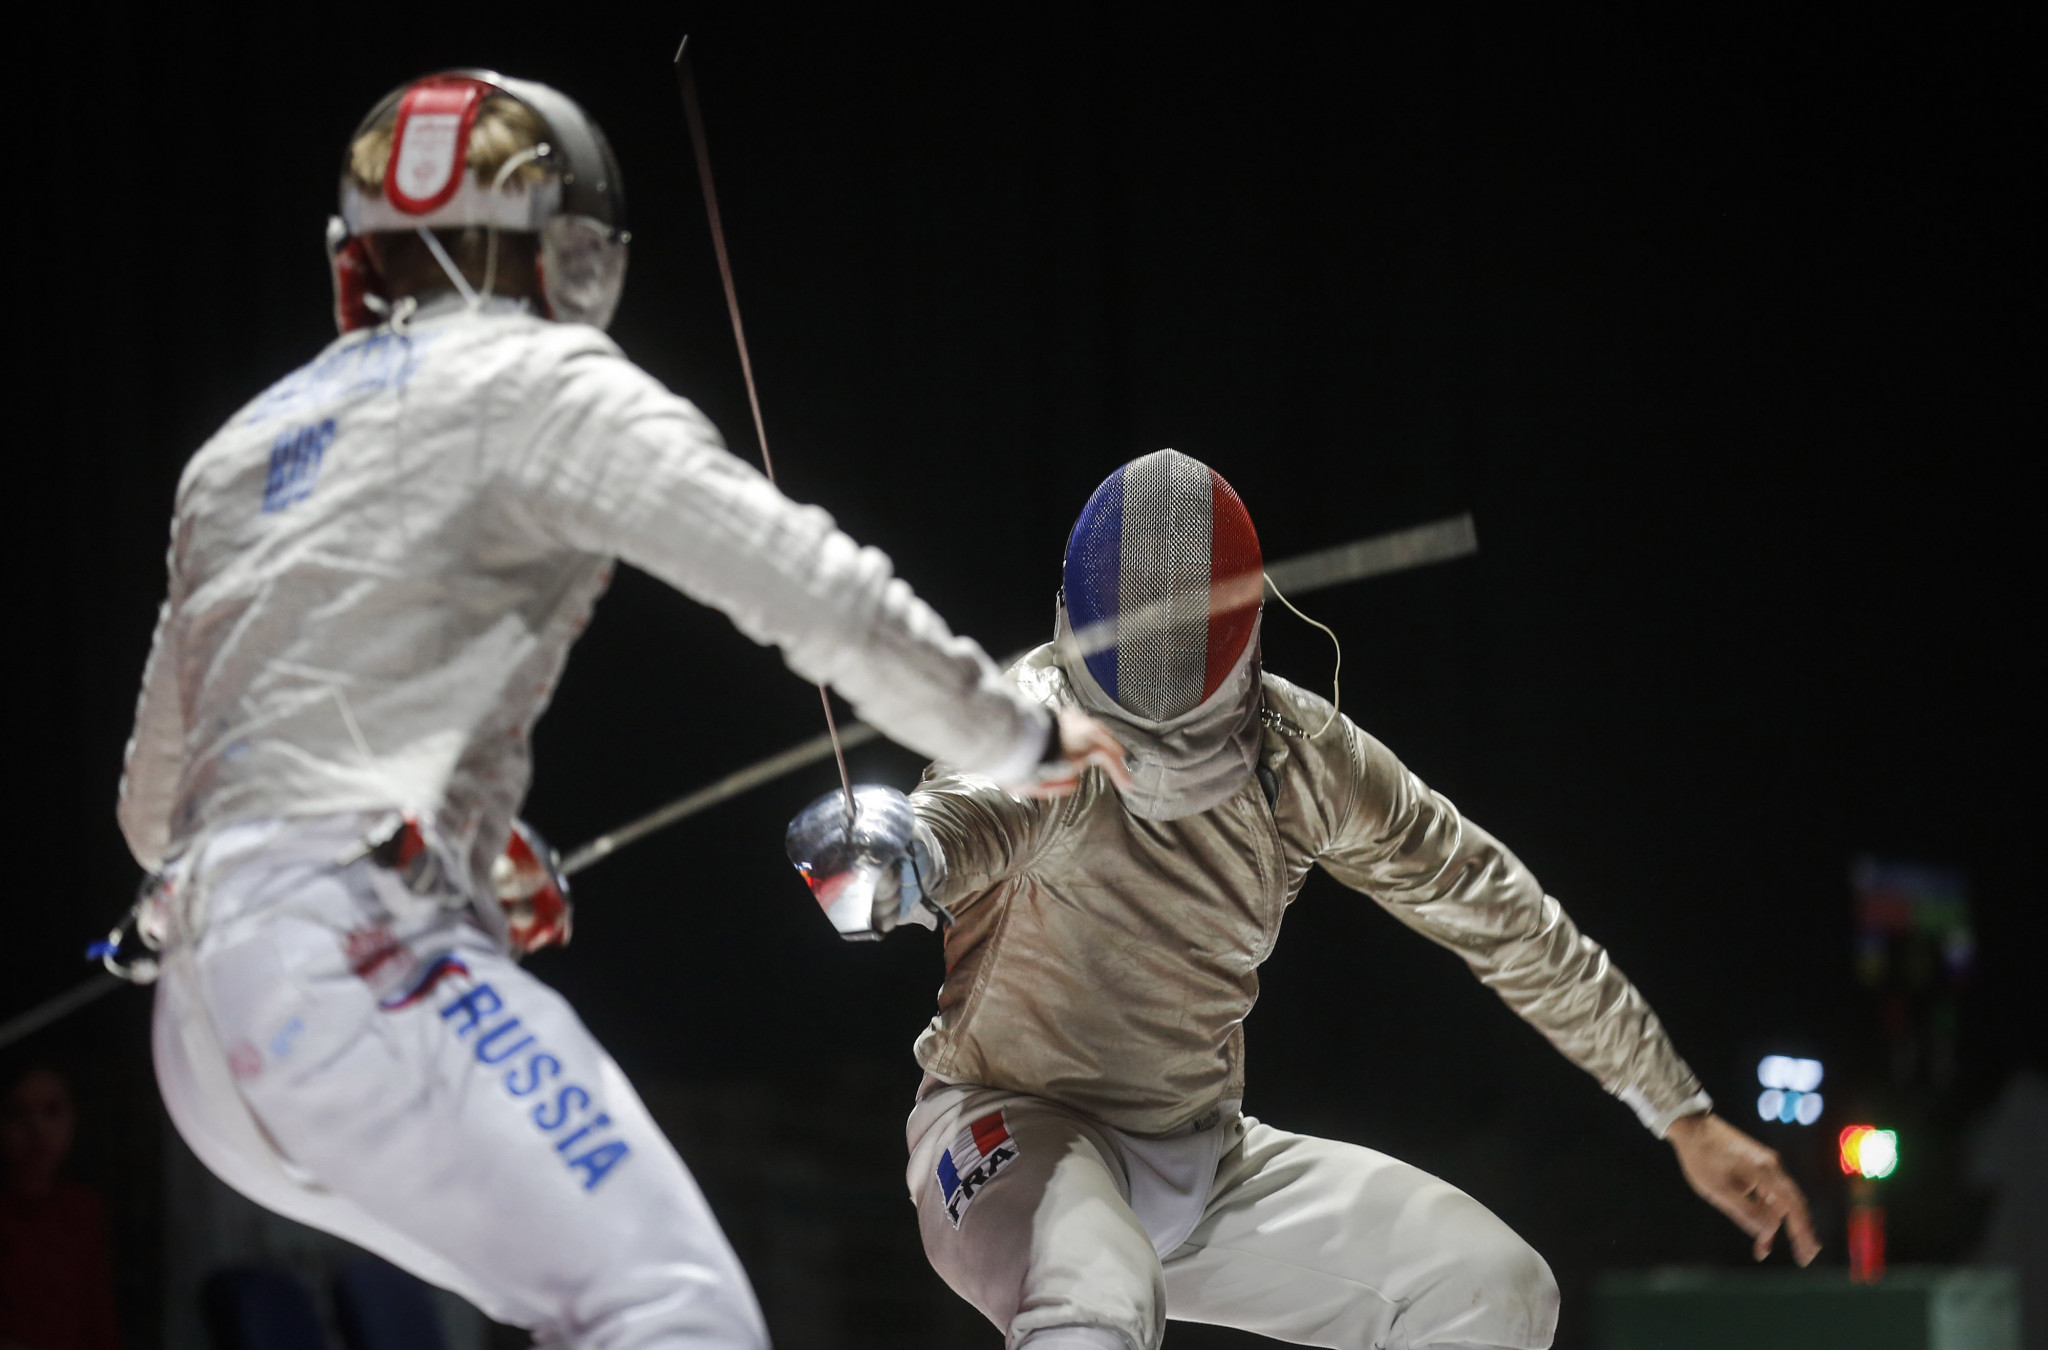 France were victorious in the men's team sabre in Poland ©Getty Images